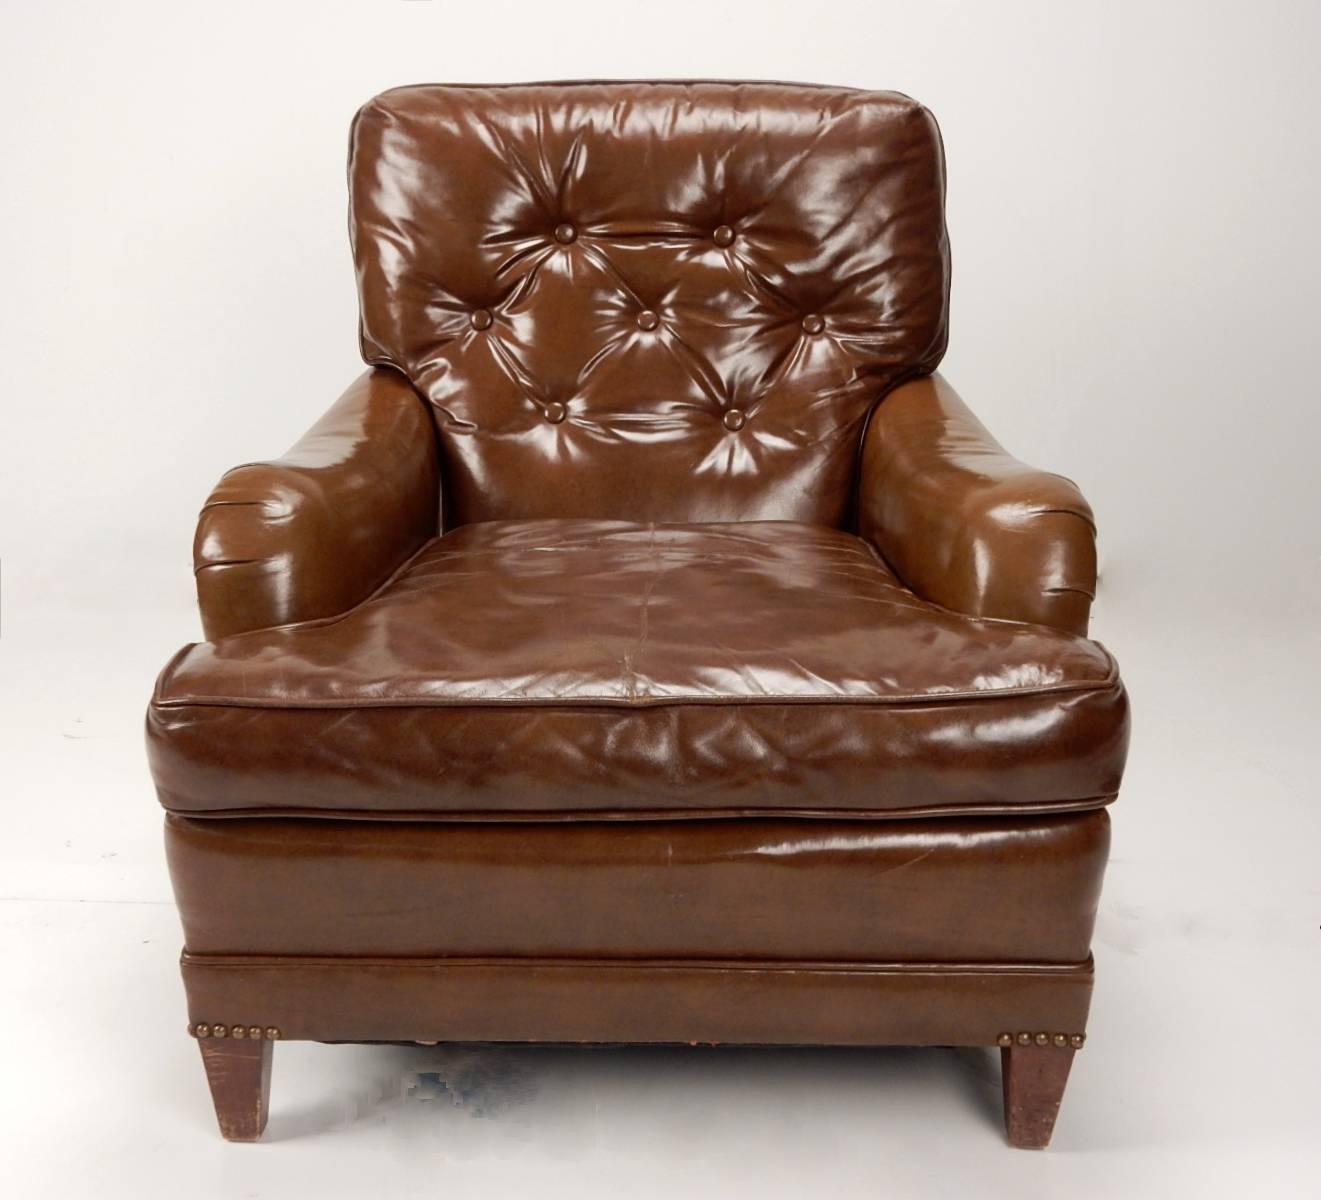 Premium glazed cognac brown leather trimmed in bronze dome tacks make these captivating club chairs and ottoman the right choice for den, library or ultra Classic living room,
circa 1940, American, showing outstanding quality and craftsmanship.
Very